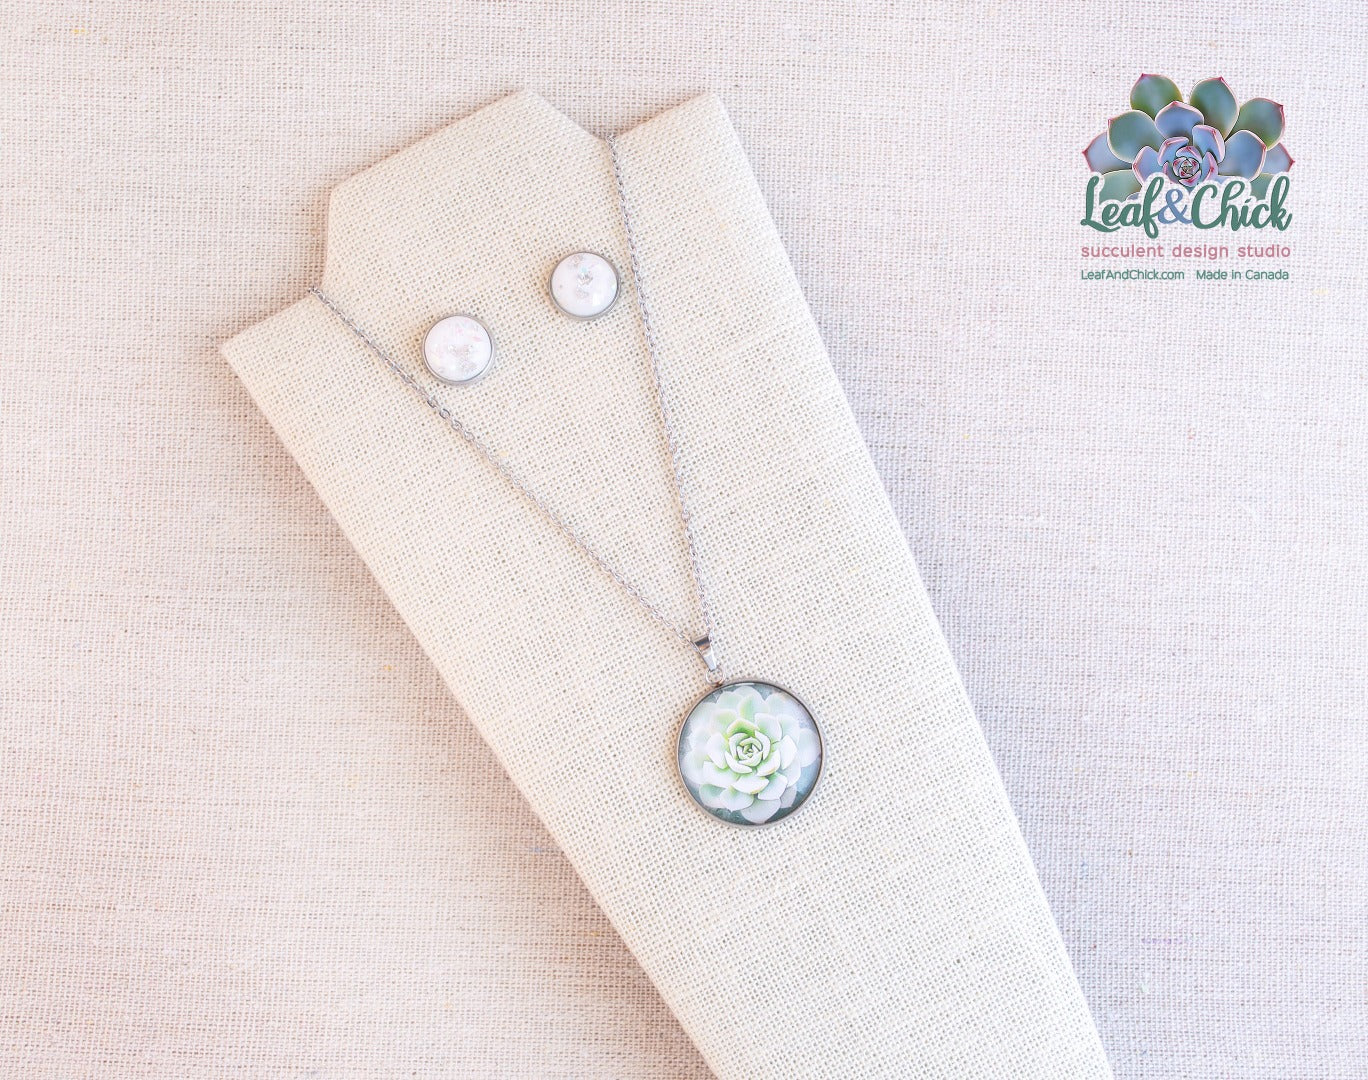 echeveria art necklace with white chunky glitter studs from Leaf & Chick